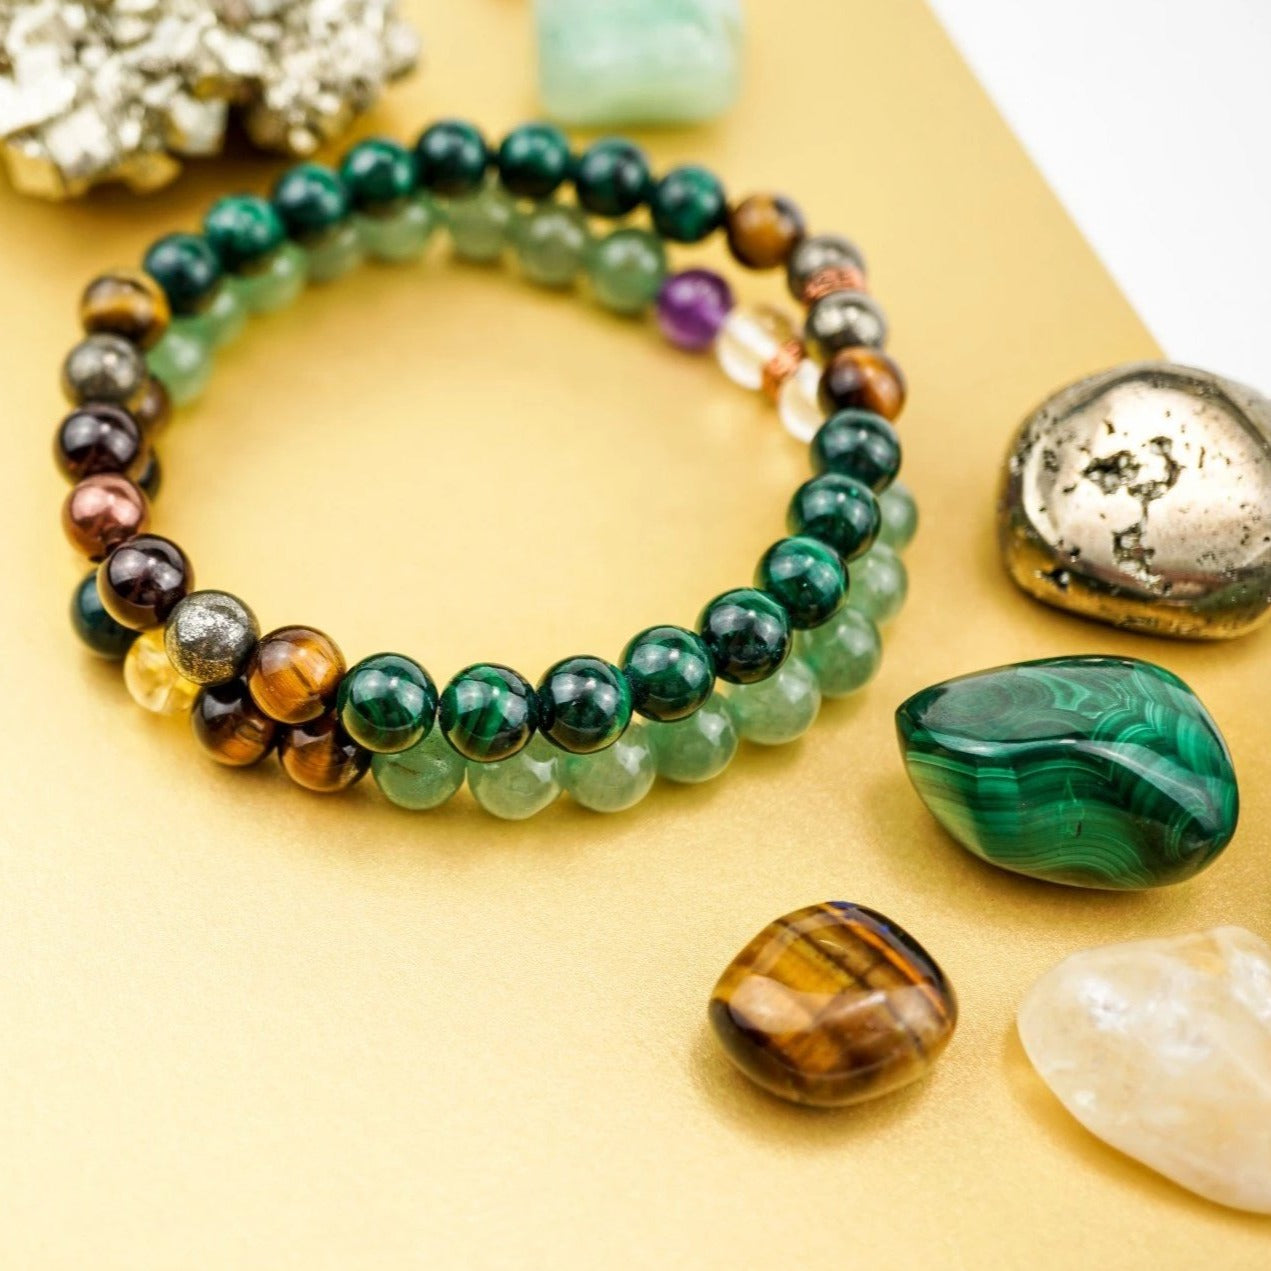 Crystal Healing 101 With Energy Muse